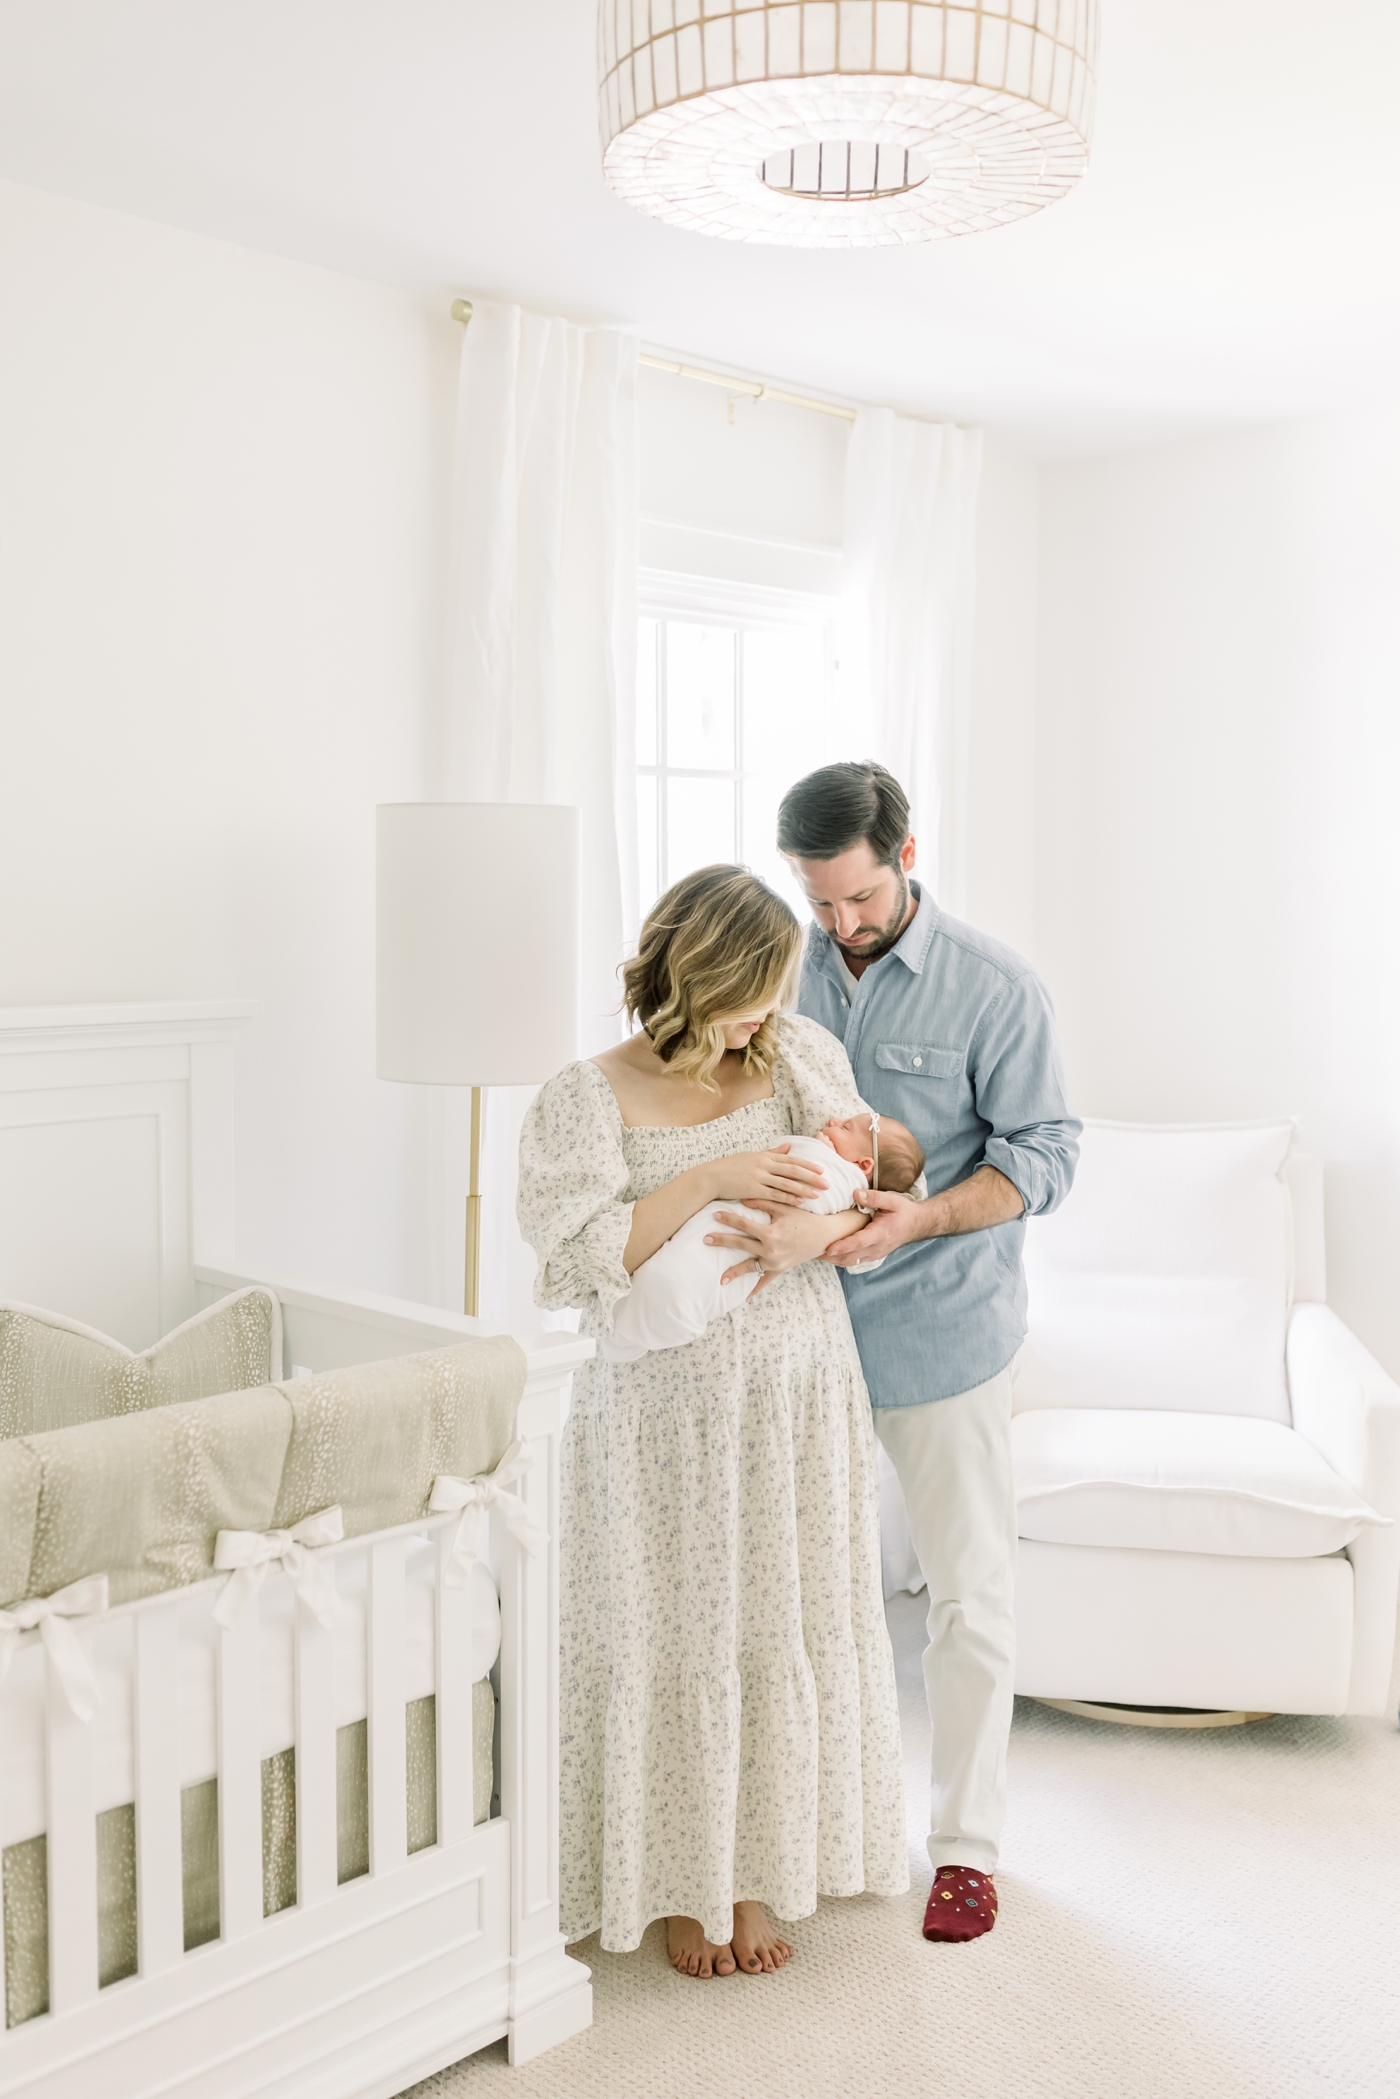 Mom and dad looking at their newborn baby in the nursery | Photo by Caitlyn Motycka Photography.